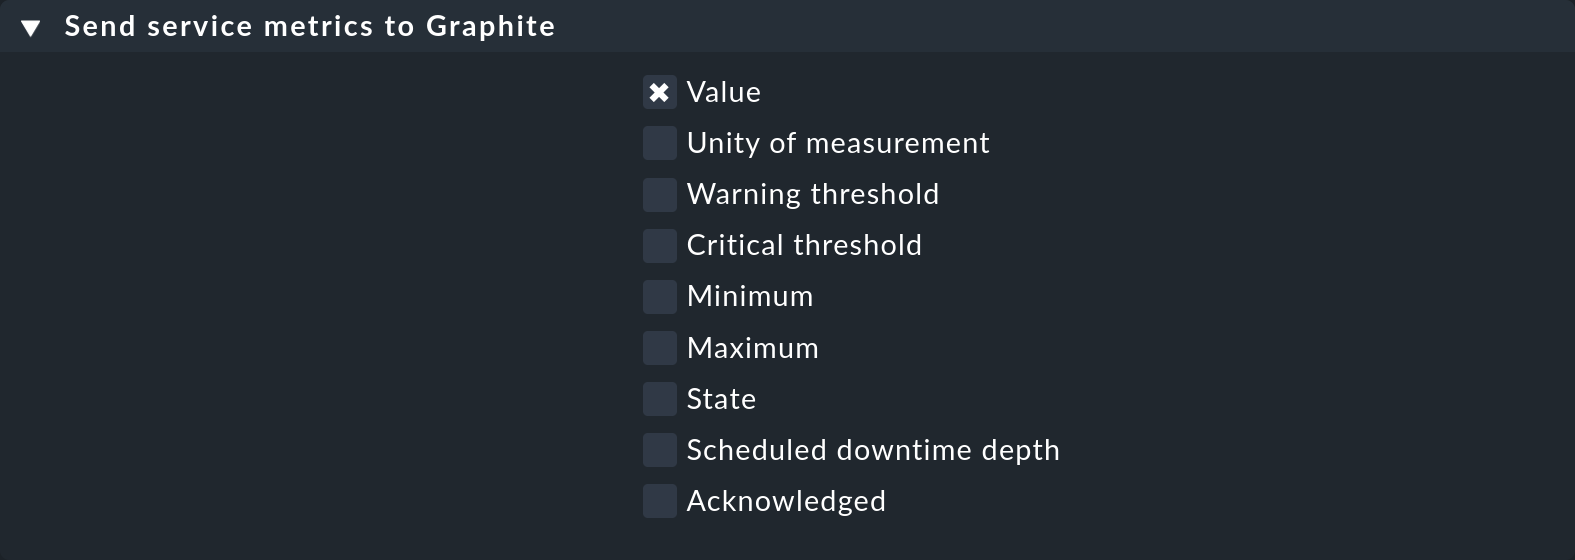 Rule for selecting the service metrics to send over the Graphite connection.